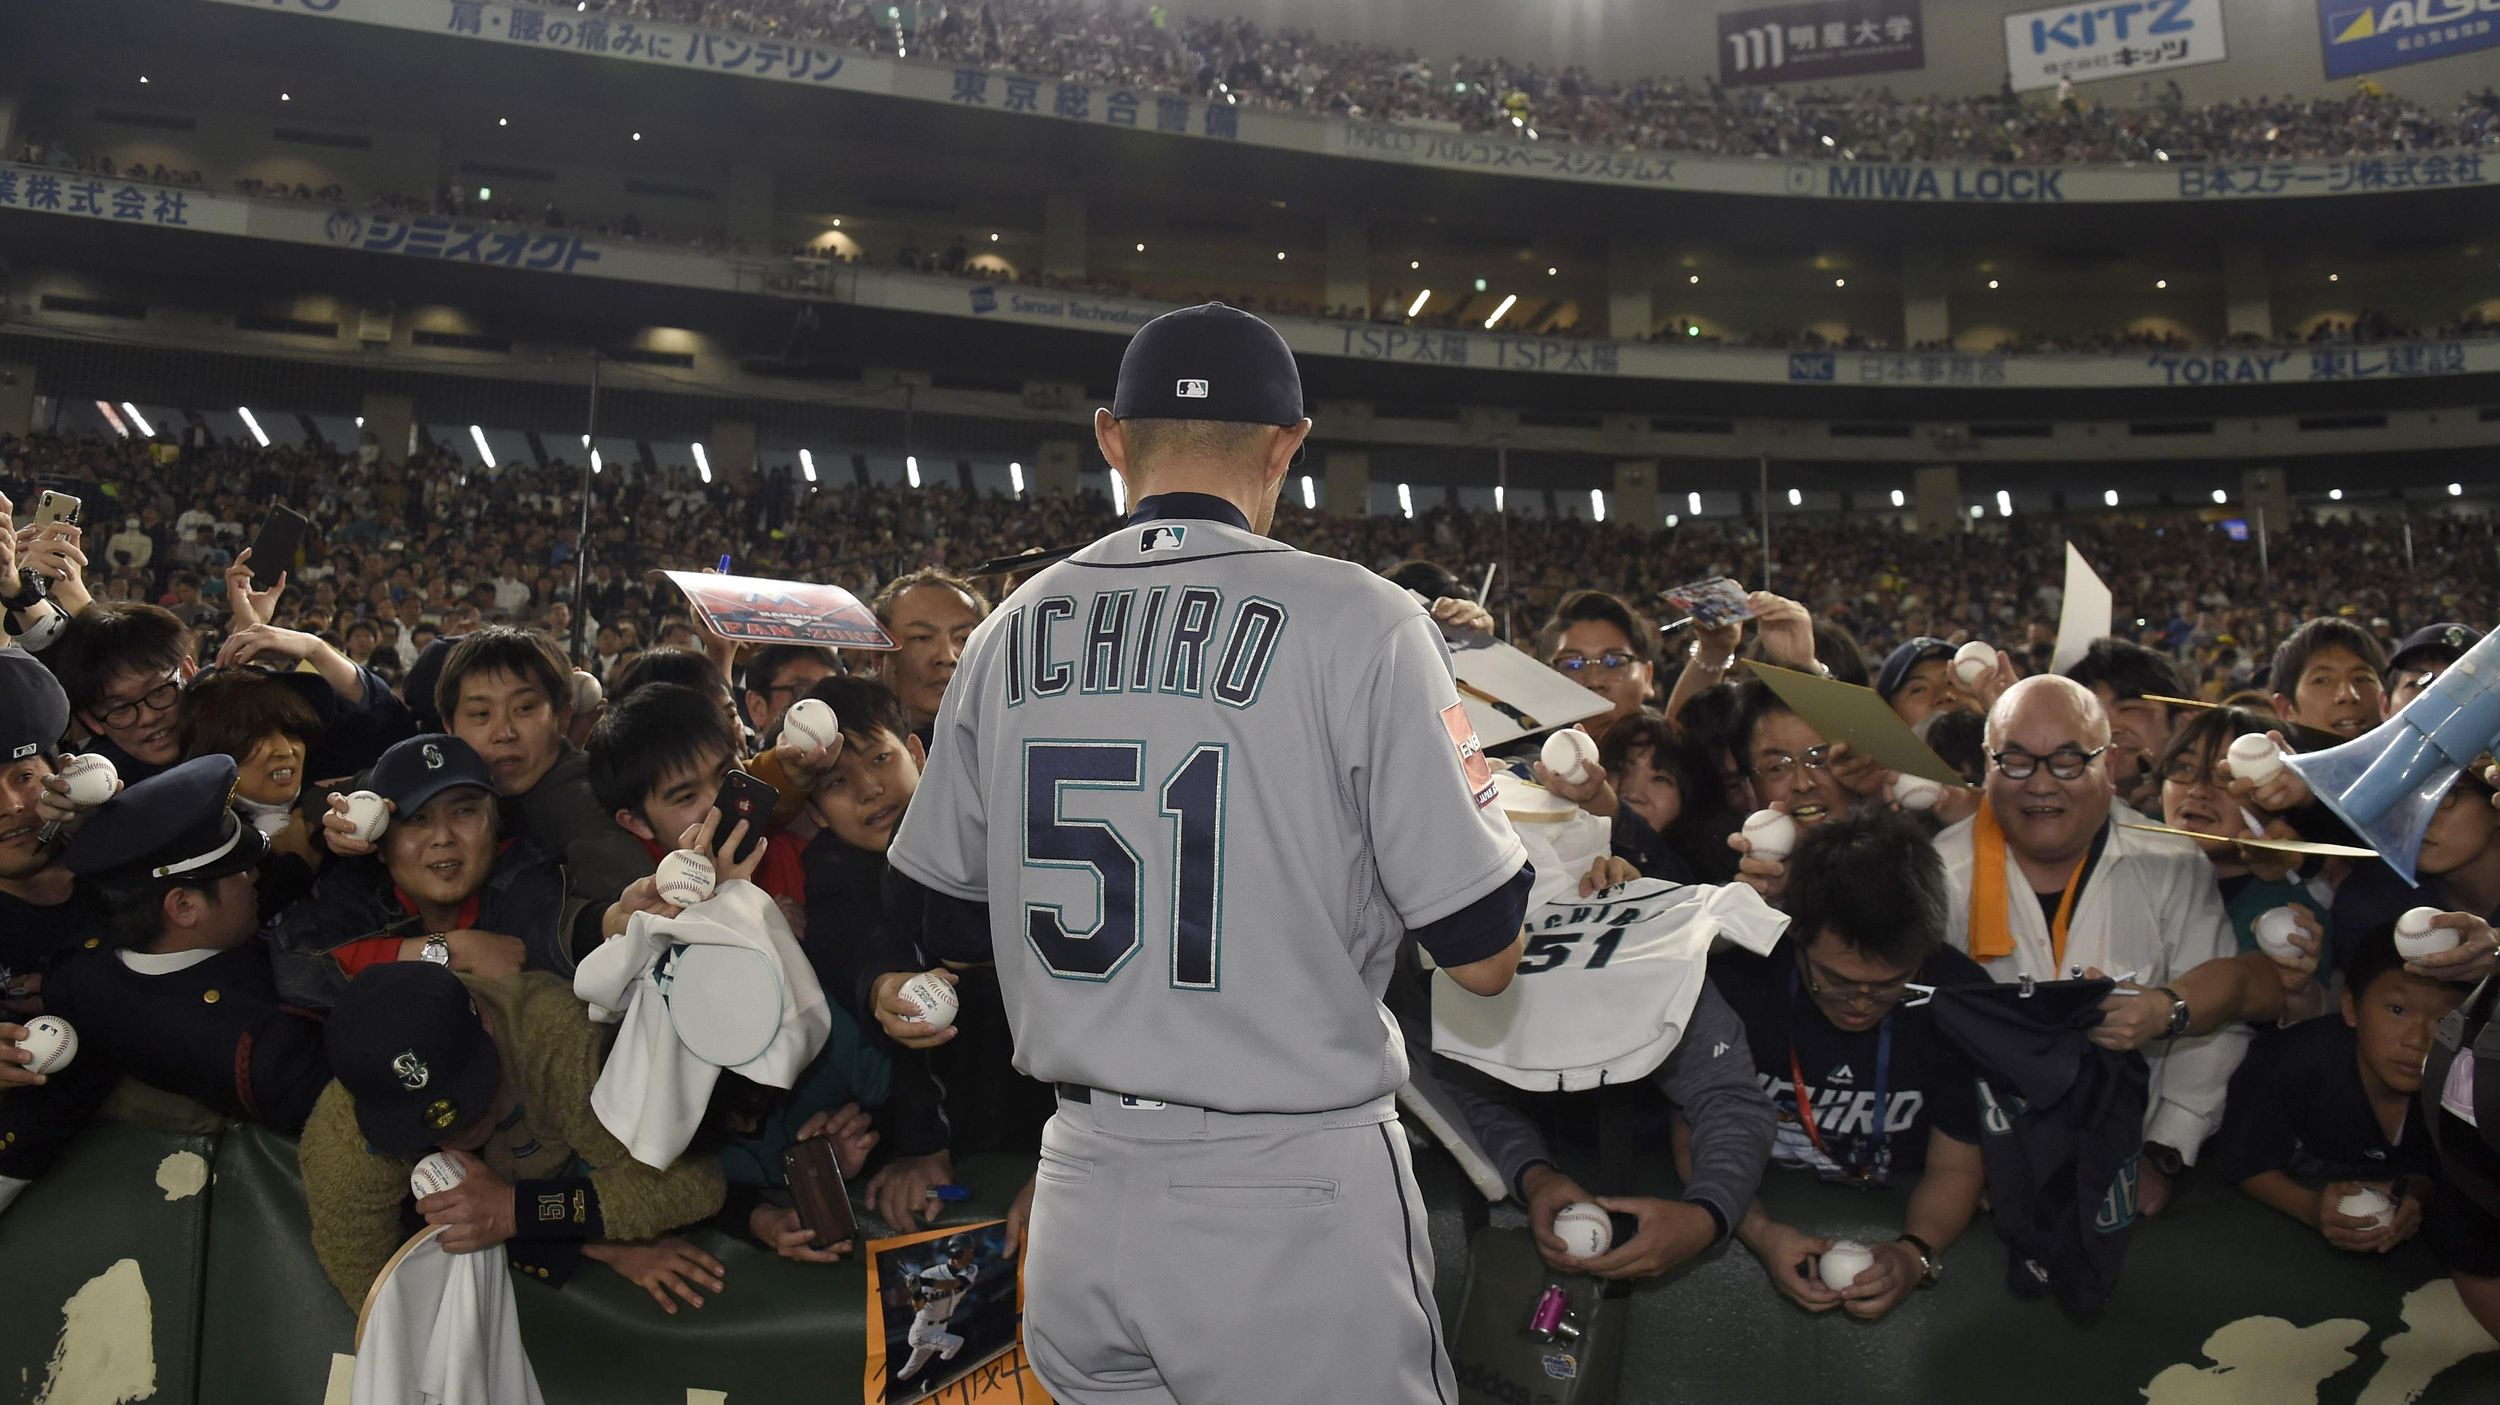 As the Mariners open 2019 season in Japan, Ichiro receives a